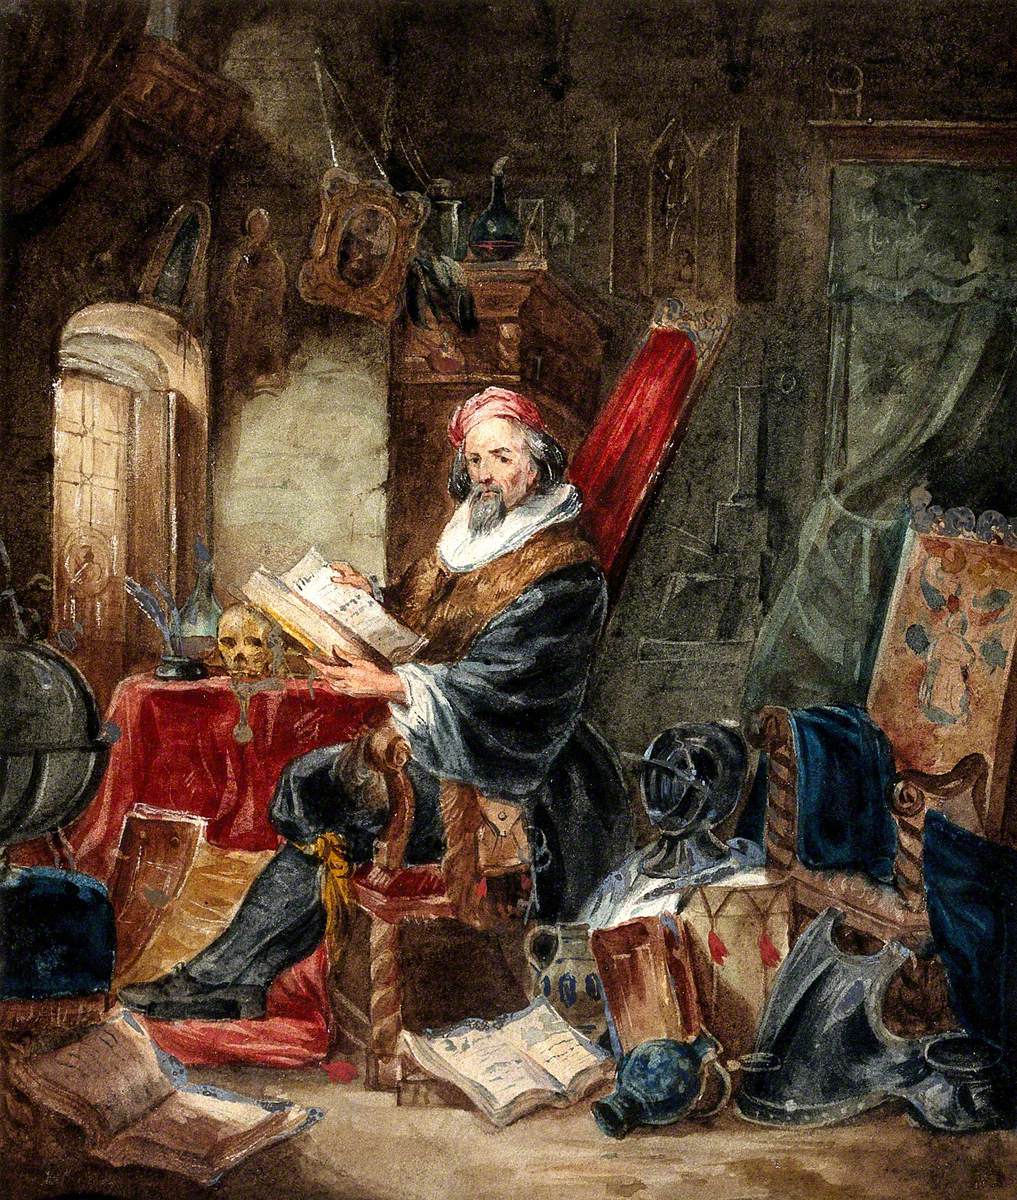 An Alchemist Reading in a Romanticised Laboratory Setting